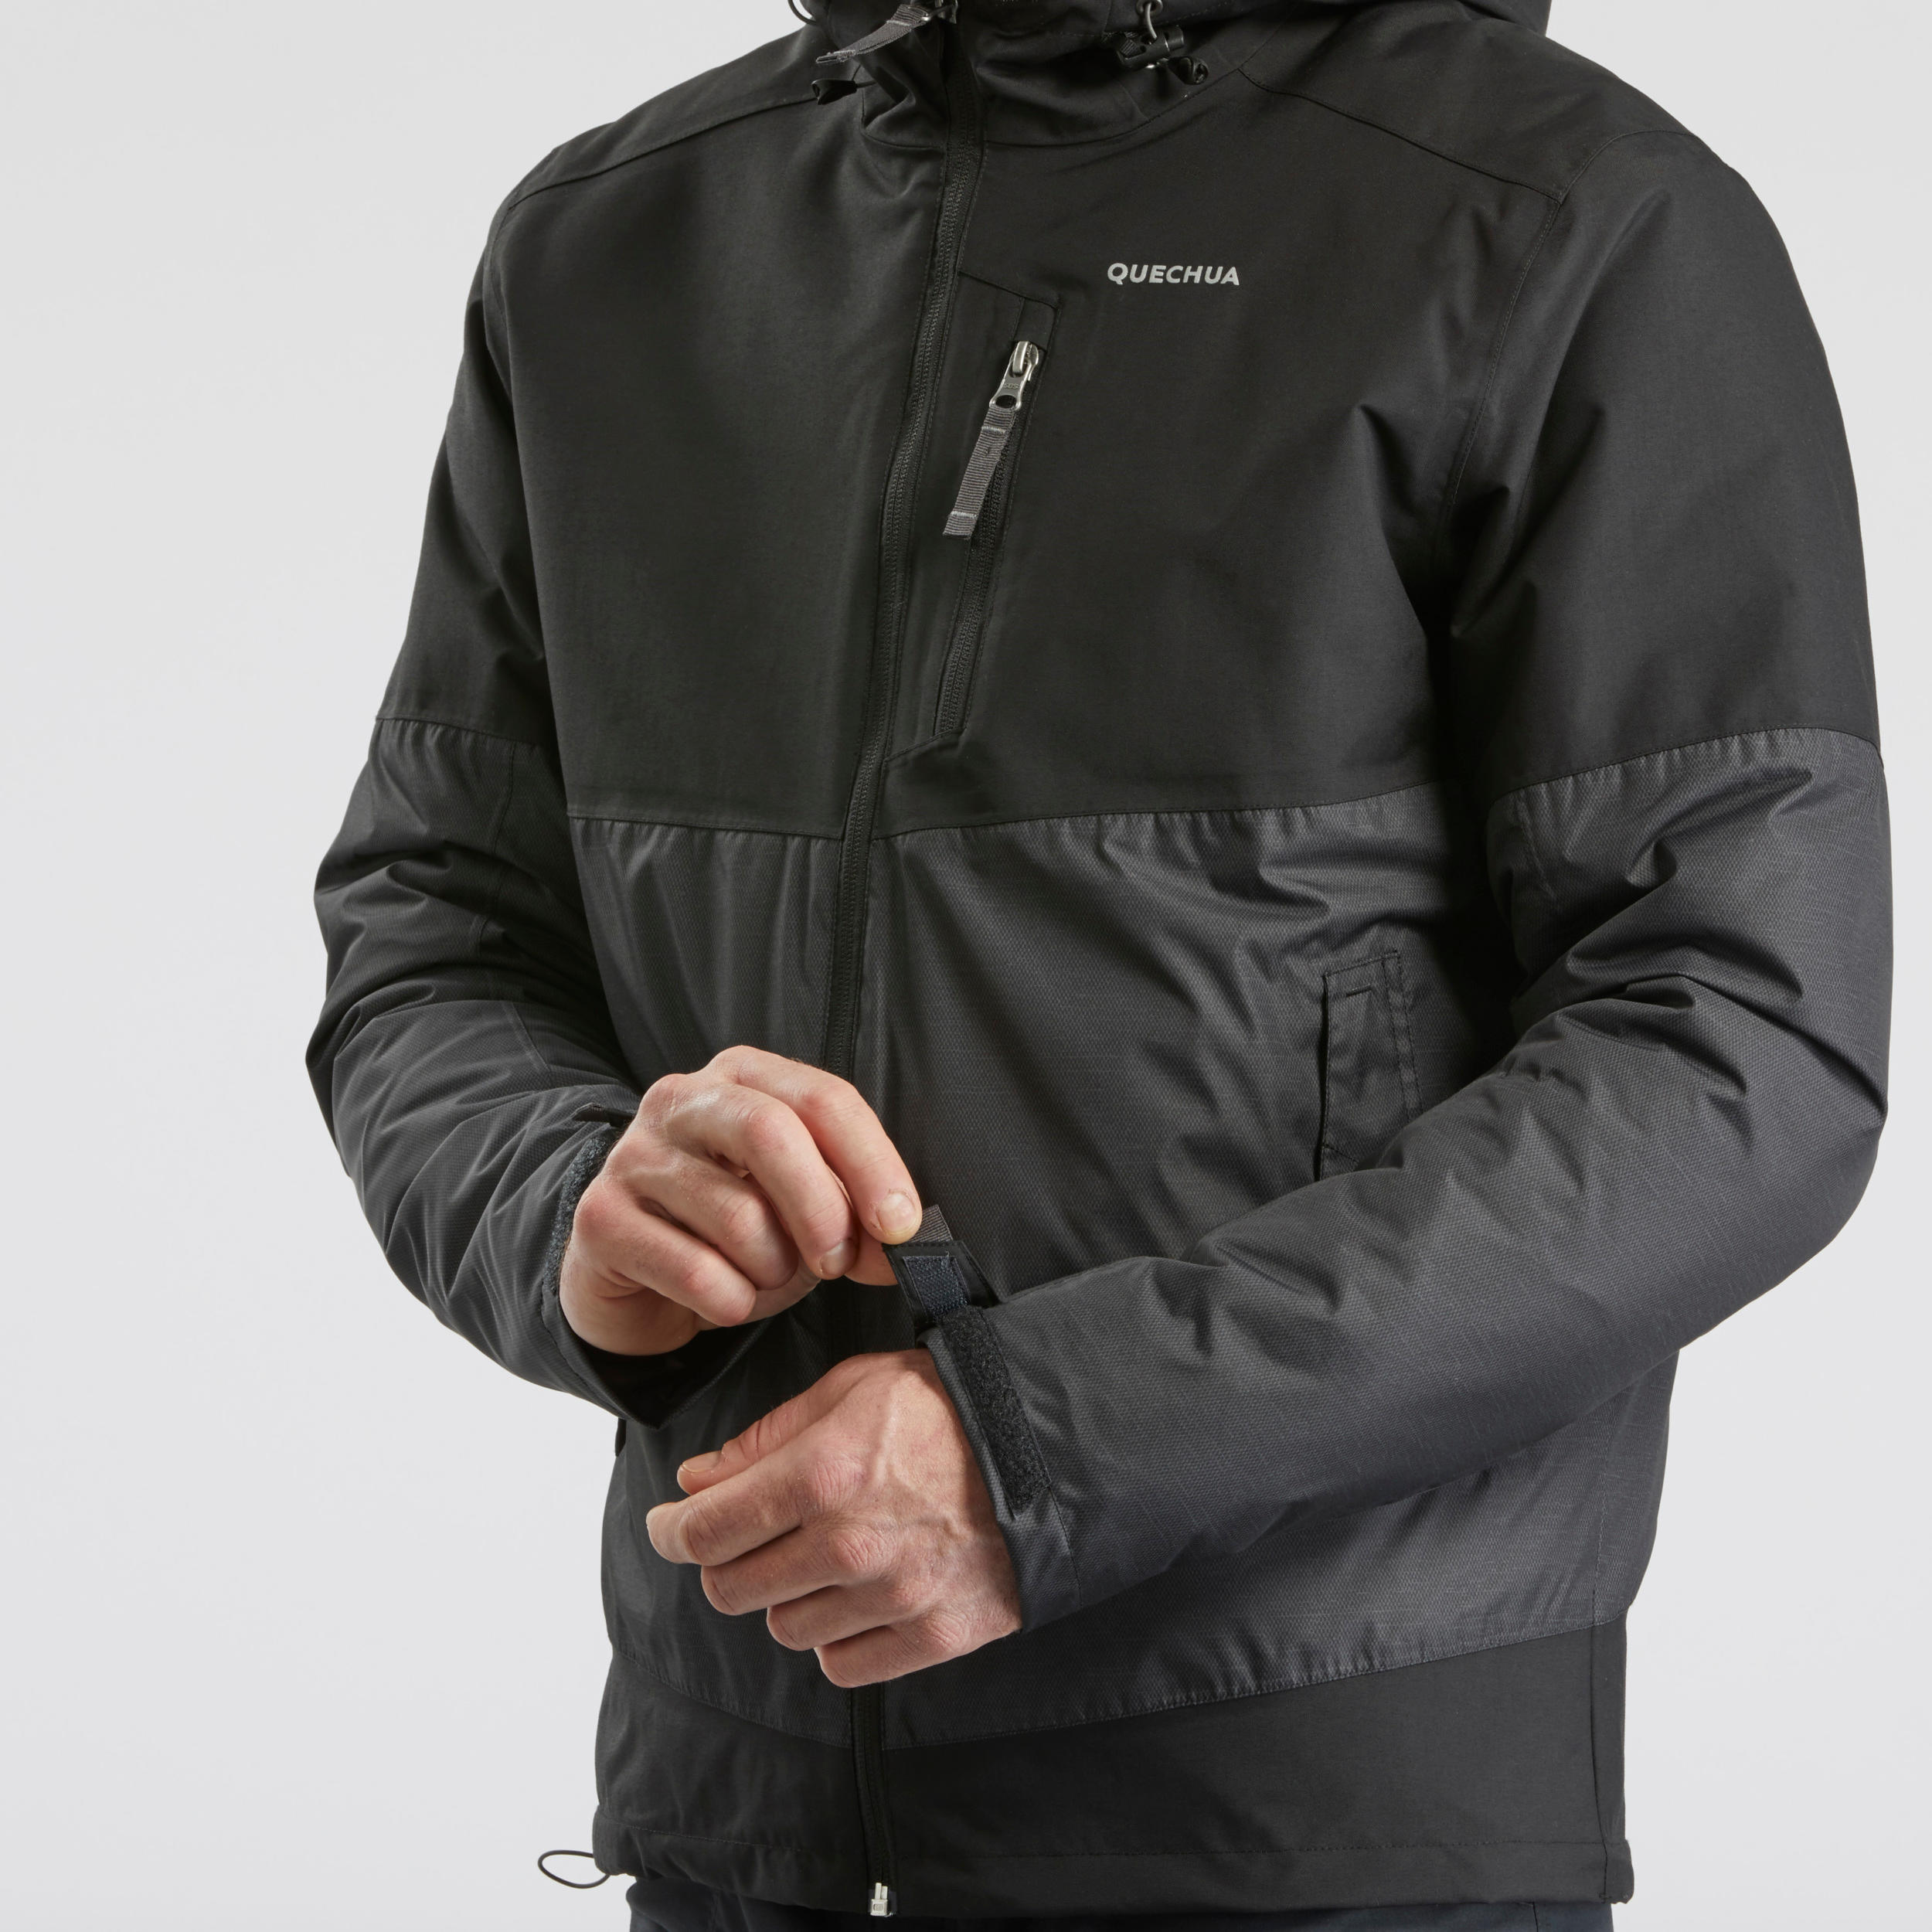 Decathlon Sports India - WINTER JACKETS AND DOWN JACKETS Some of the  features of our jackets are: -Lightweight -Durability -Warmth -Compact  Design -Water Repellent For happy trekking, head to your nearest Decathlon